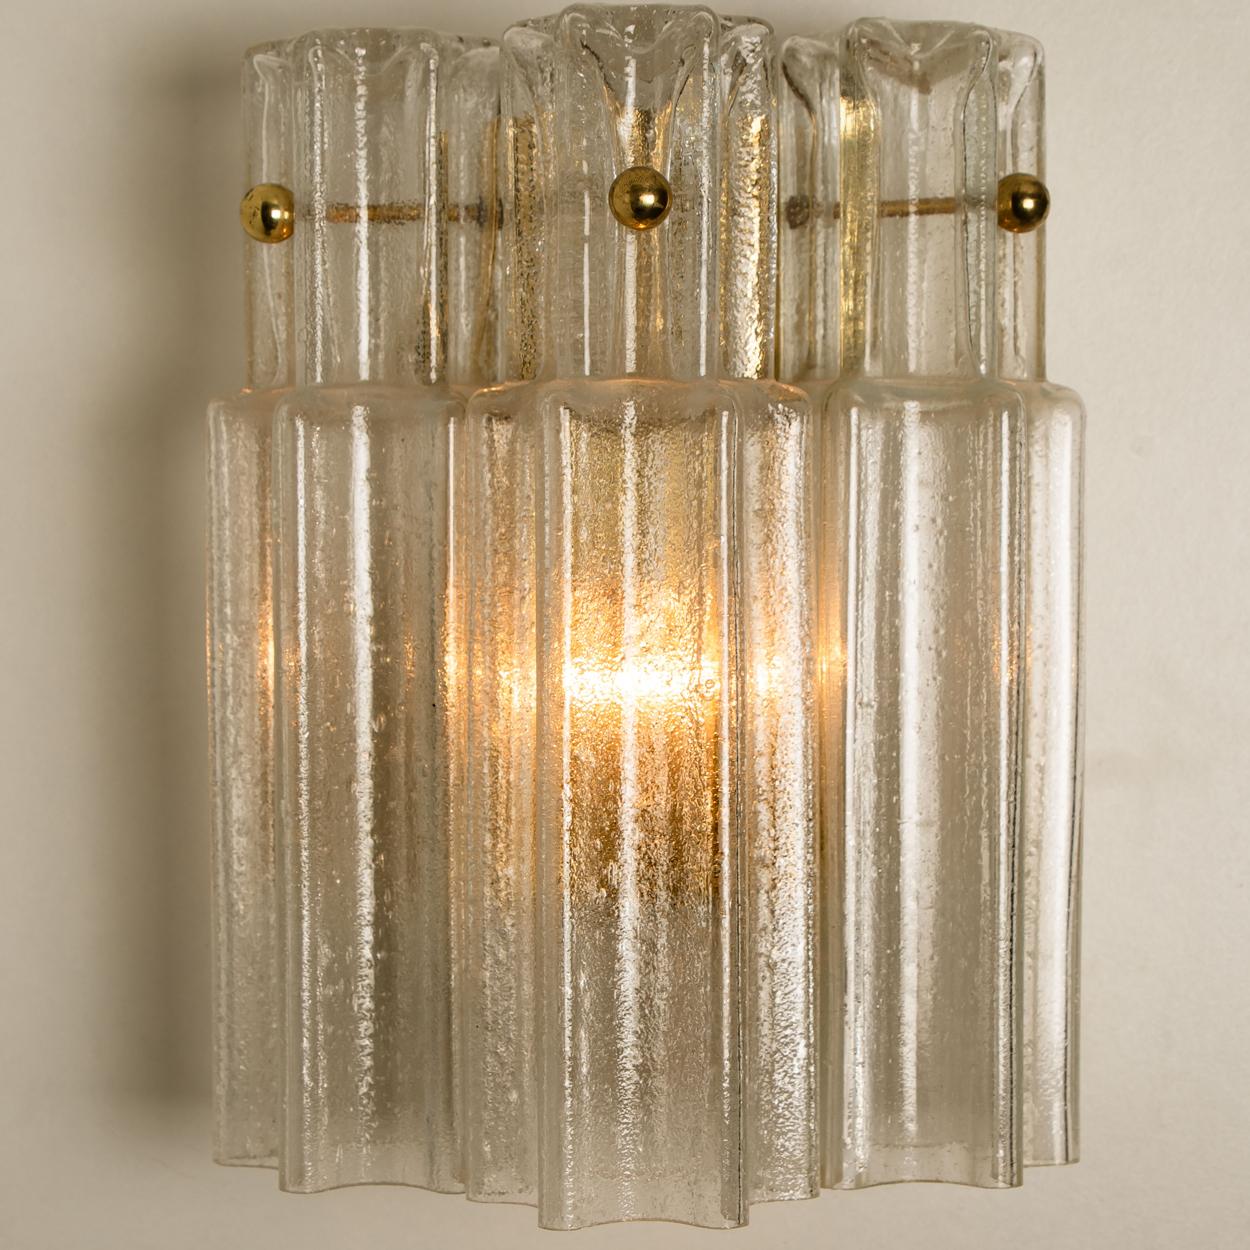 A wonderful pair of Murano glass wall lights designed by J.T. Kalmar for Kalmar Franken, Vienna, Austria. Manufactured in circa 1960s. These wall lights are handmade and a high quality pieces. Murano tubes in clear glass hanging on a brass plate.